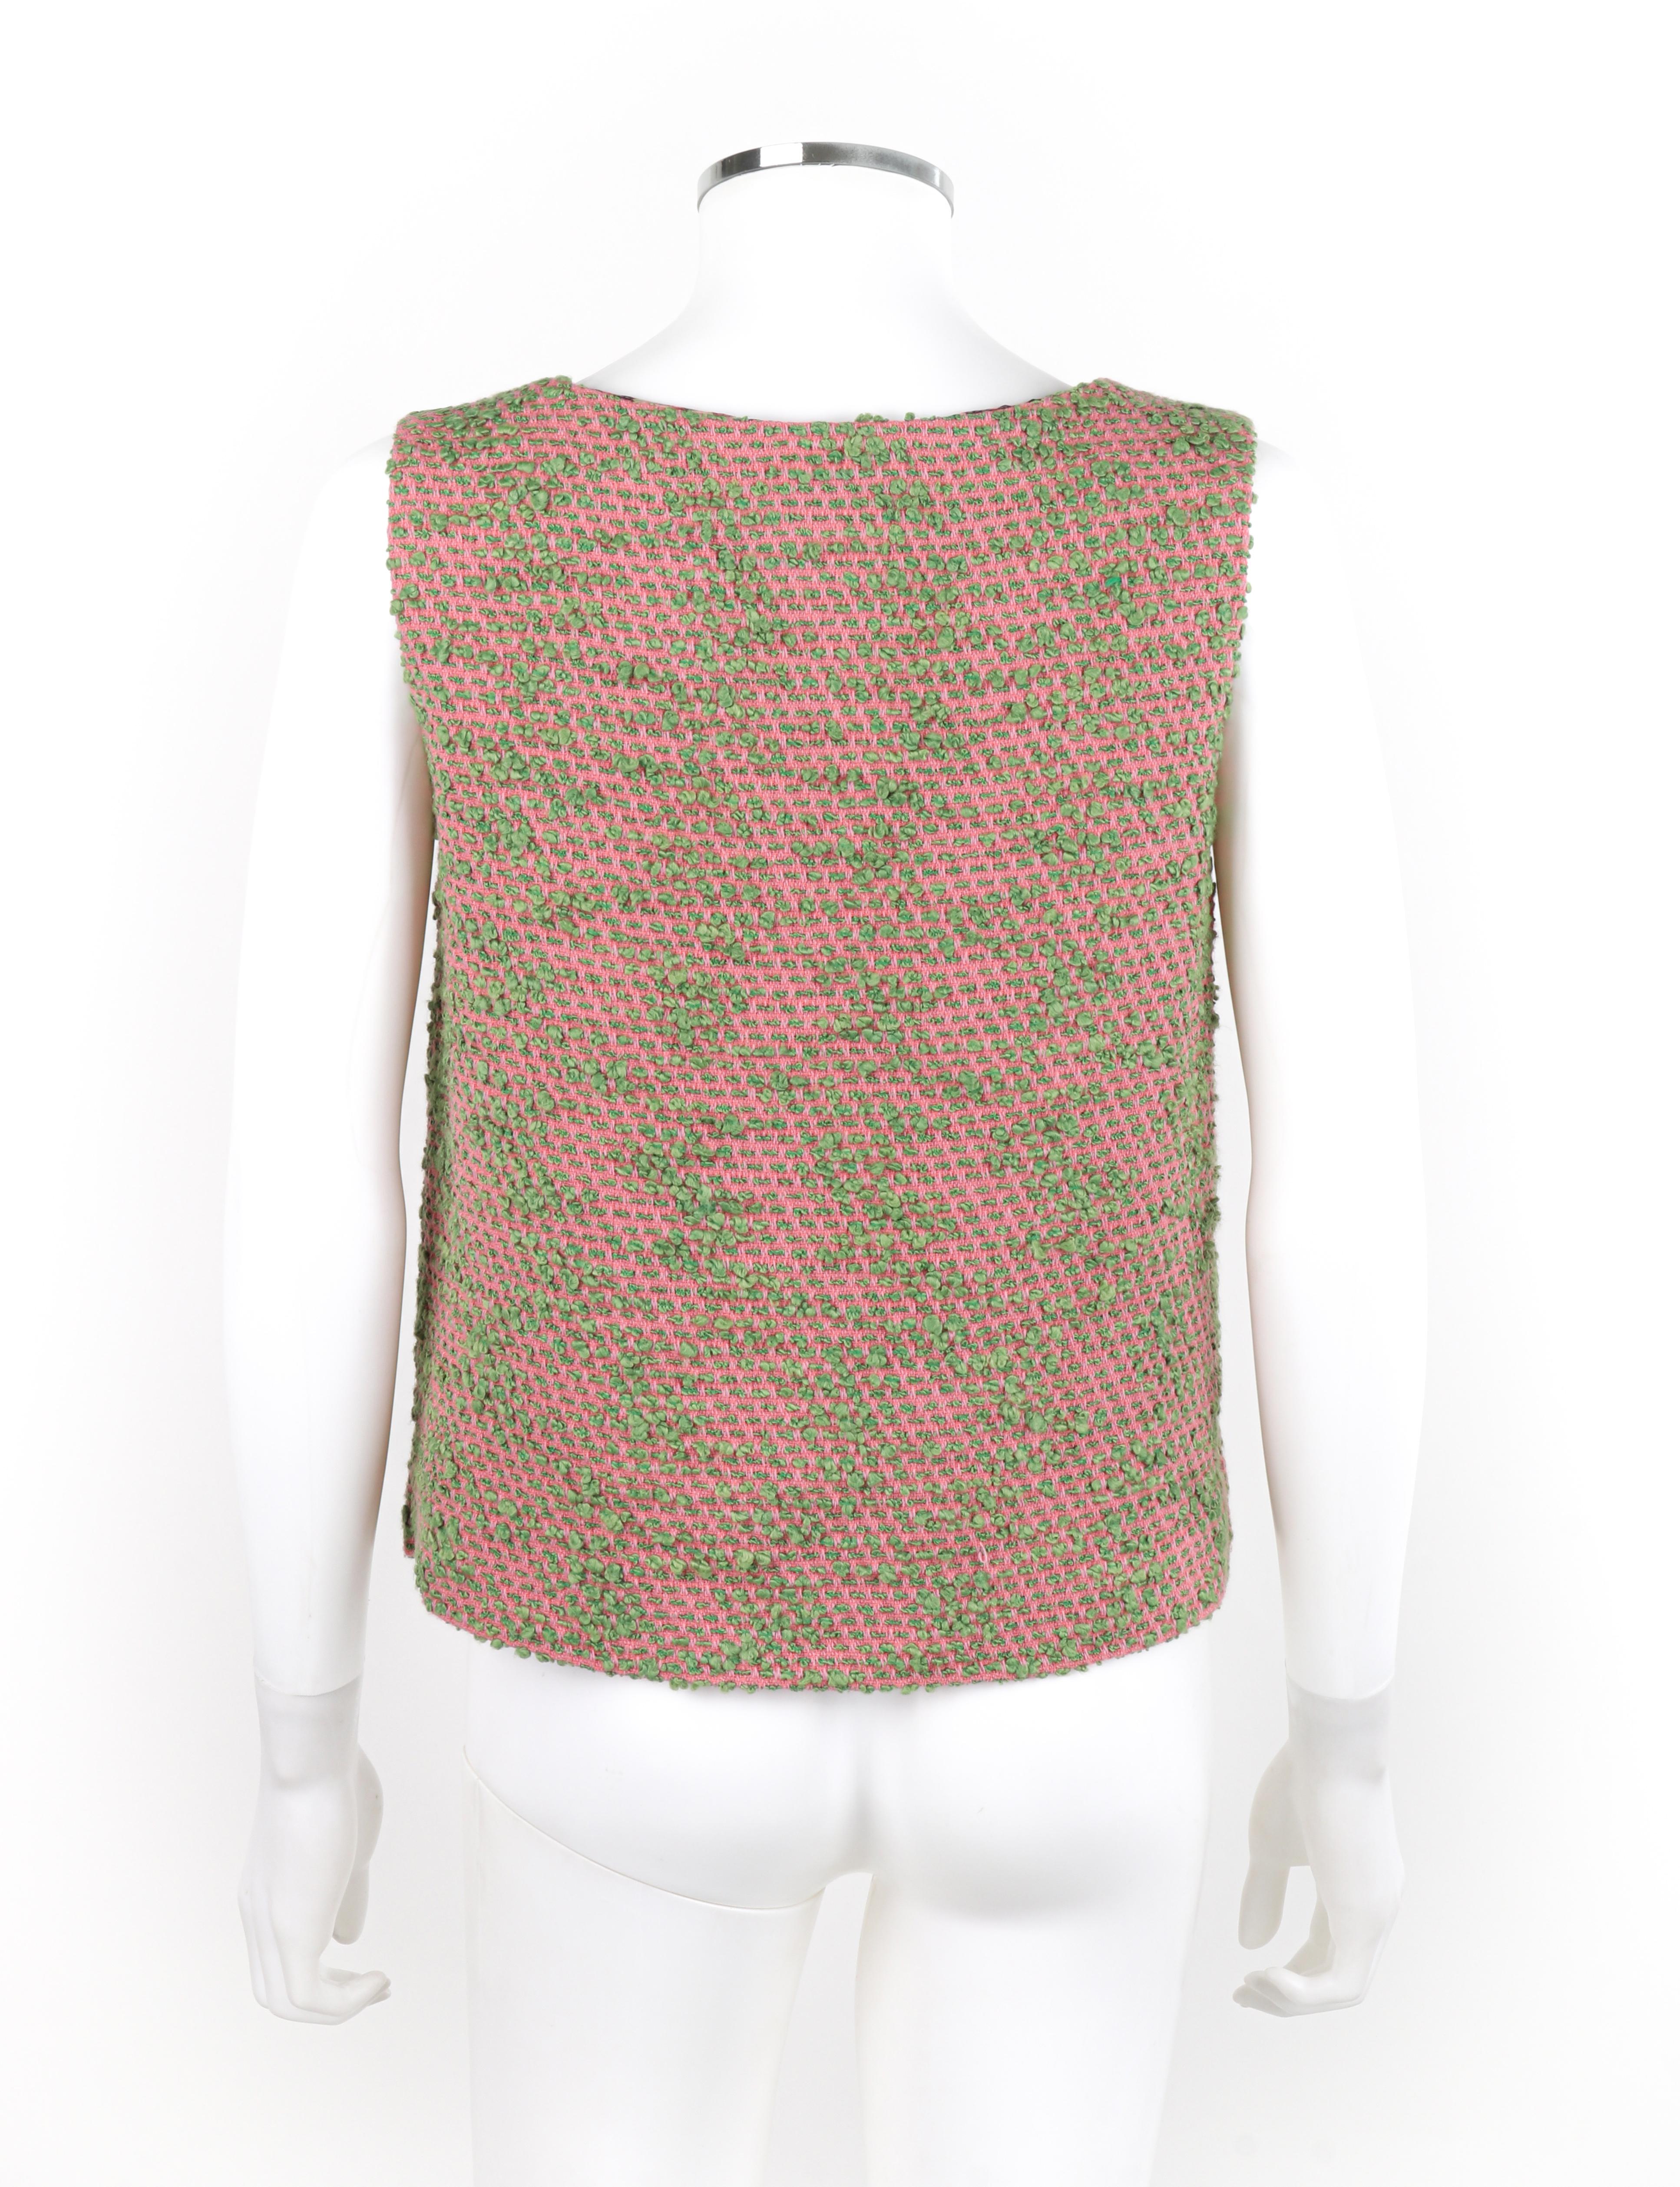 CHANEL c.2000s Pink Green Boucle Knit Silk Jacket & Tank Top Shell 2pc Size 42 For Sale 3